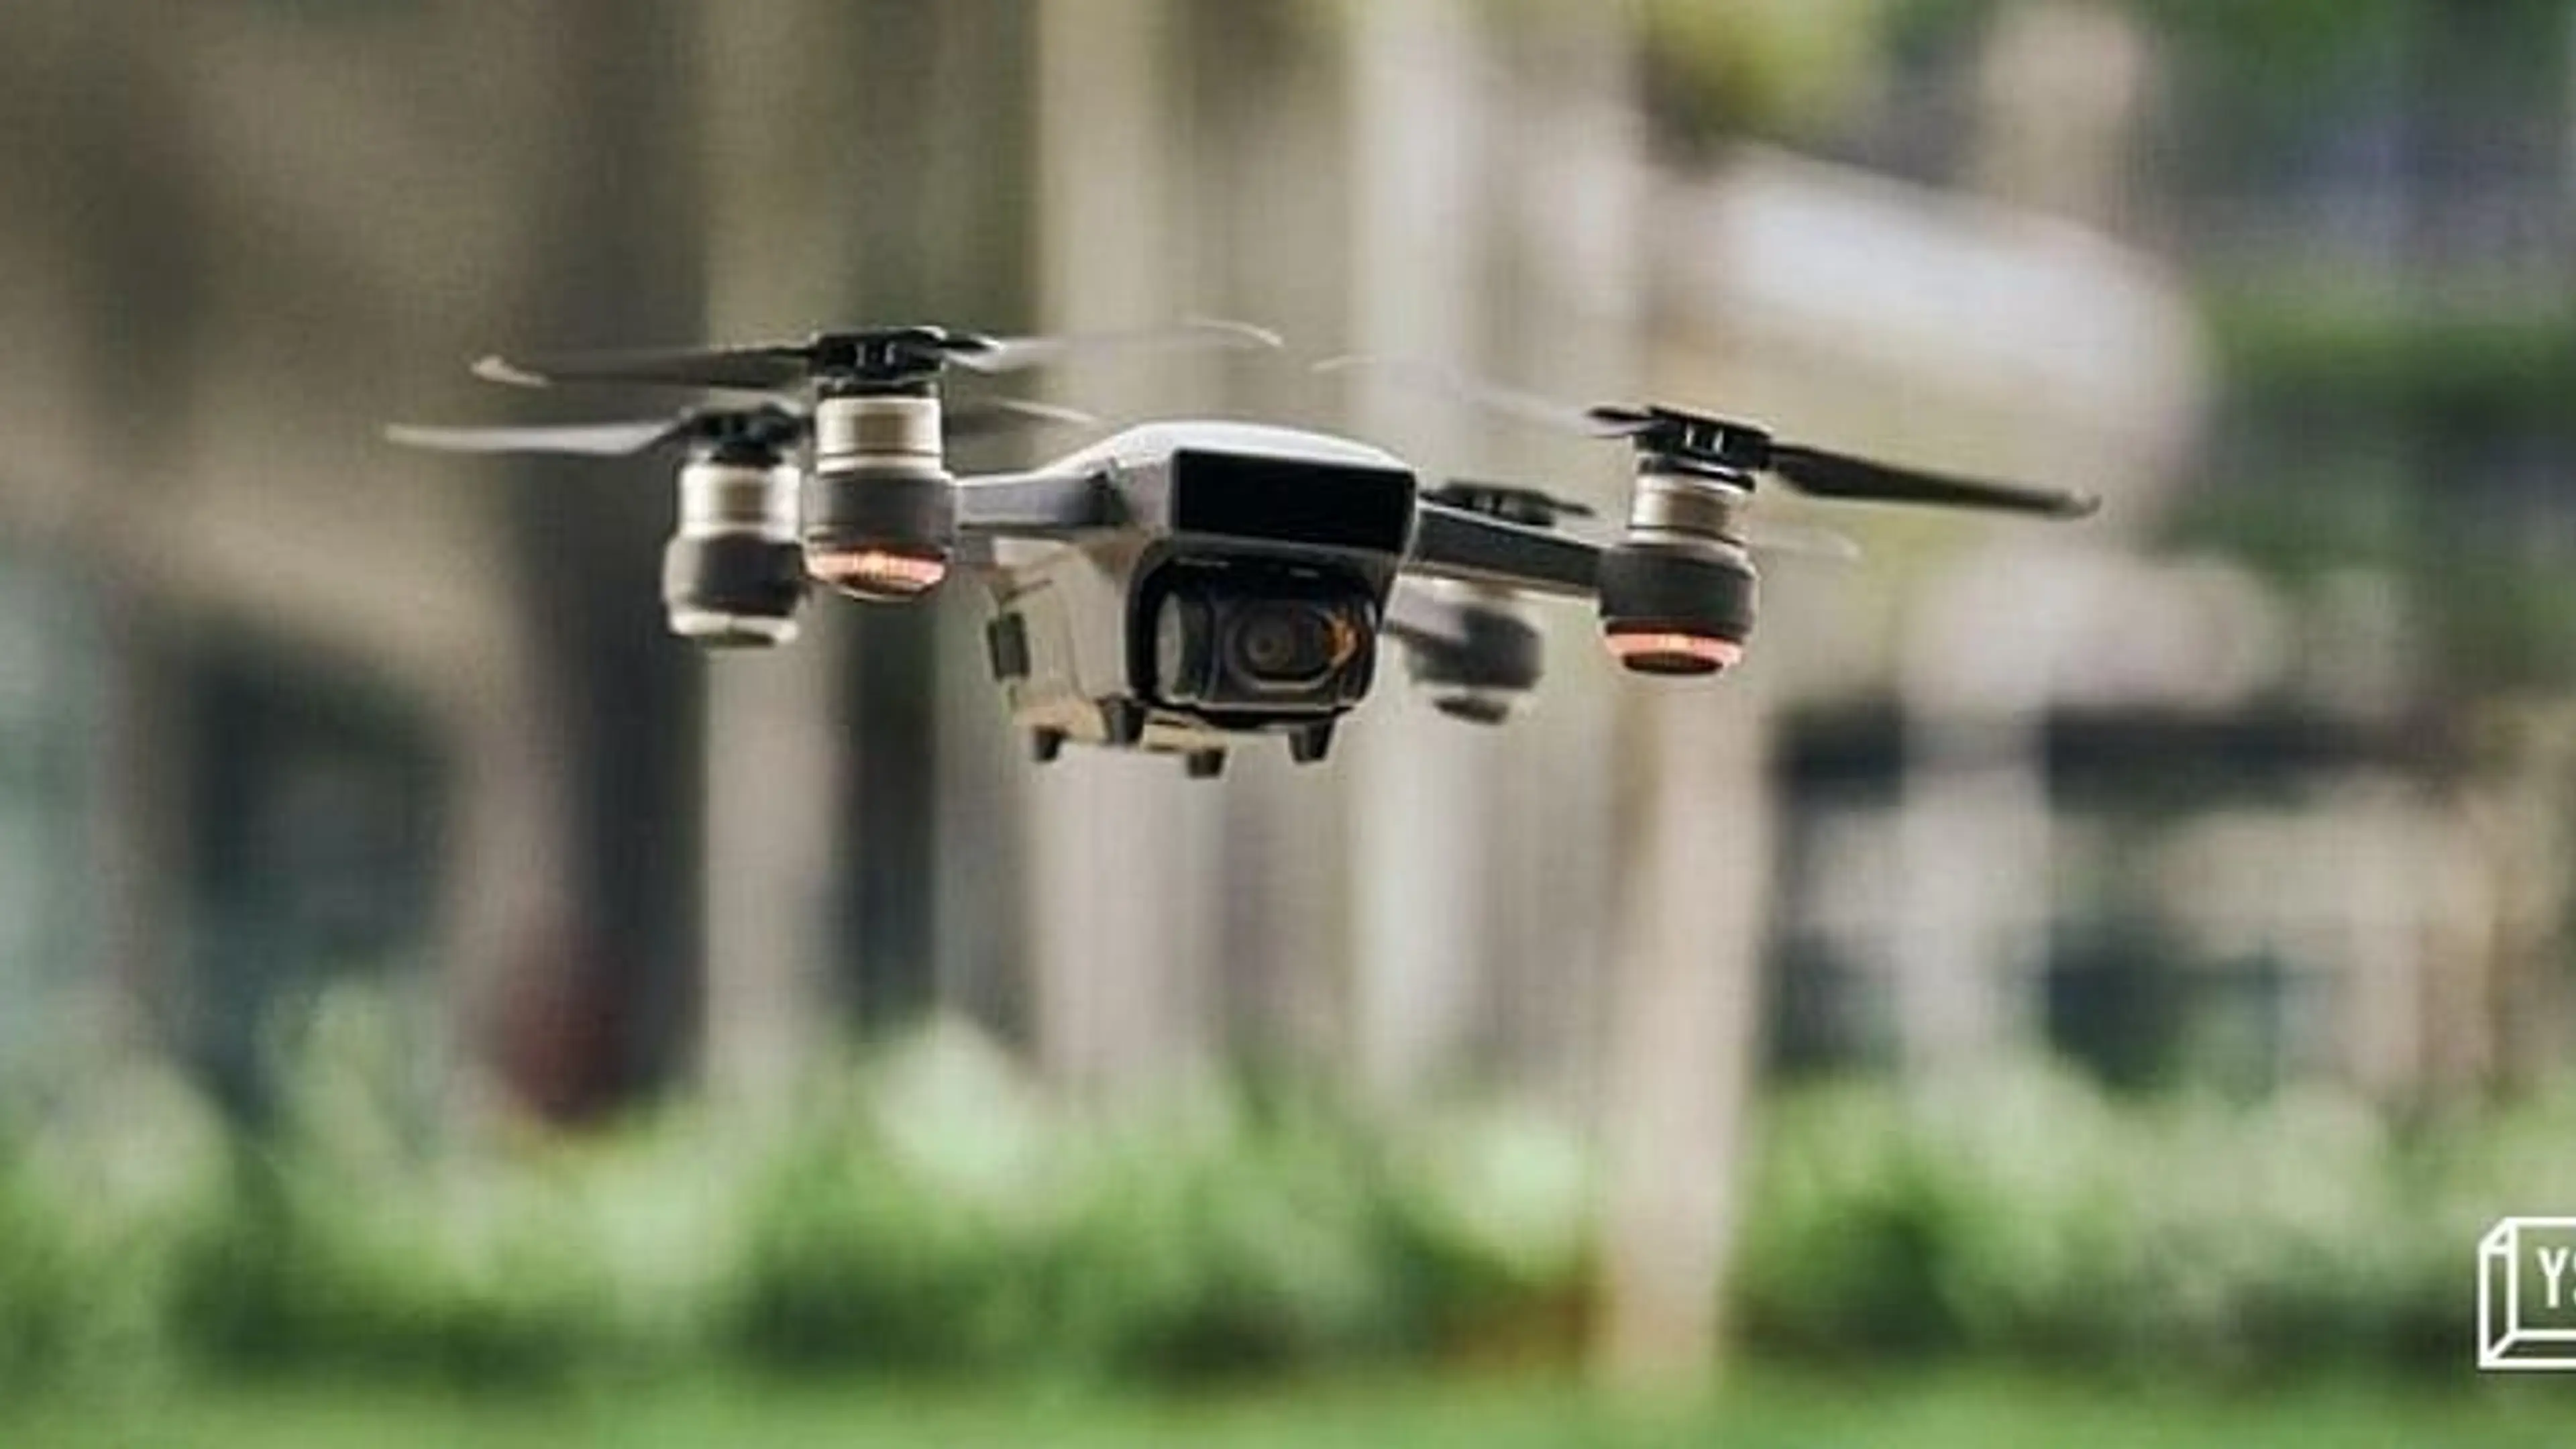 Coromandel acquires additional 7% stake in drone manufacturer Dhaksha for Rs 150 Cr